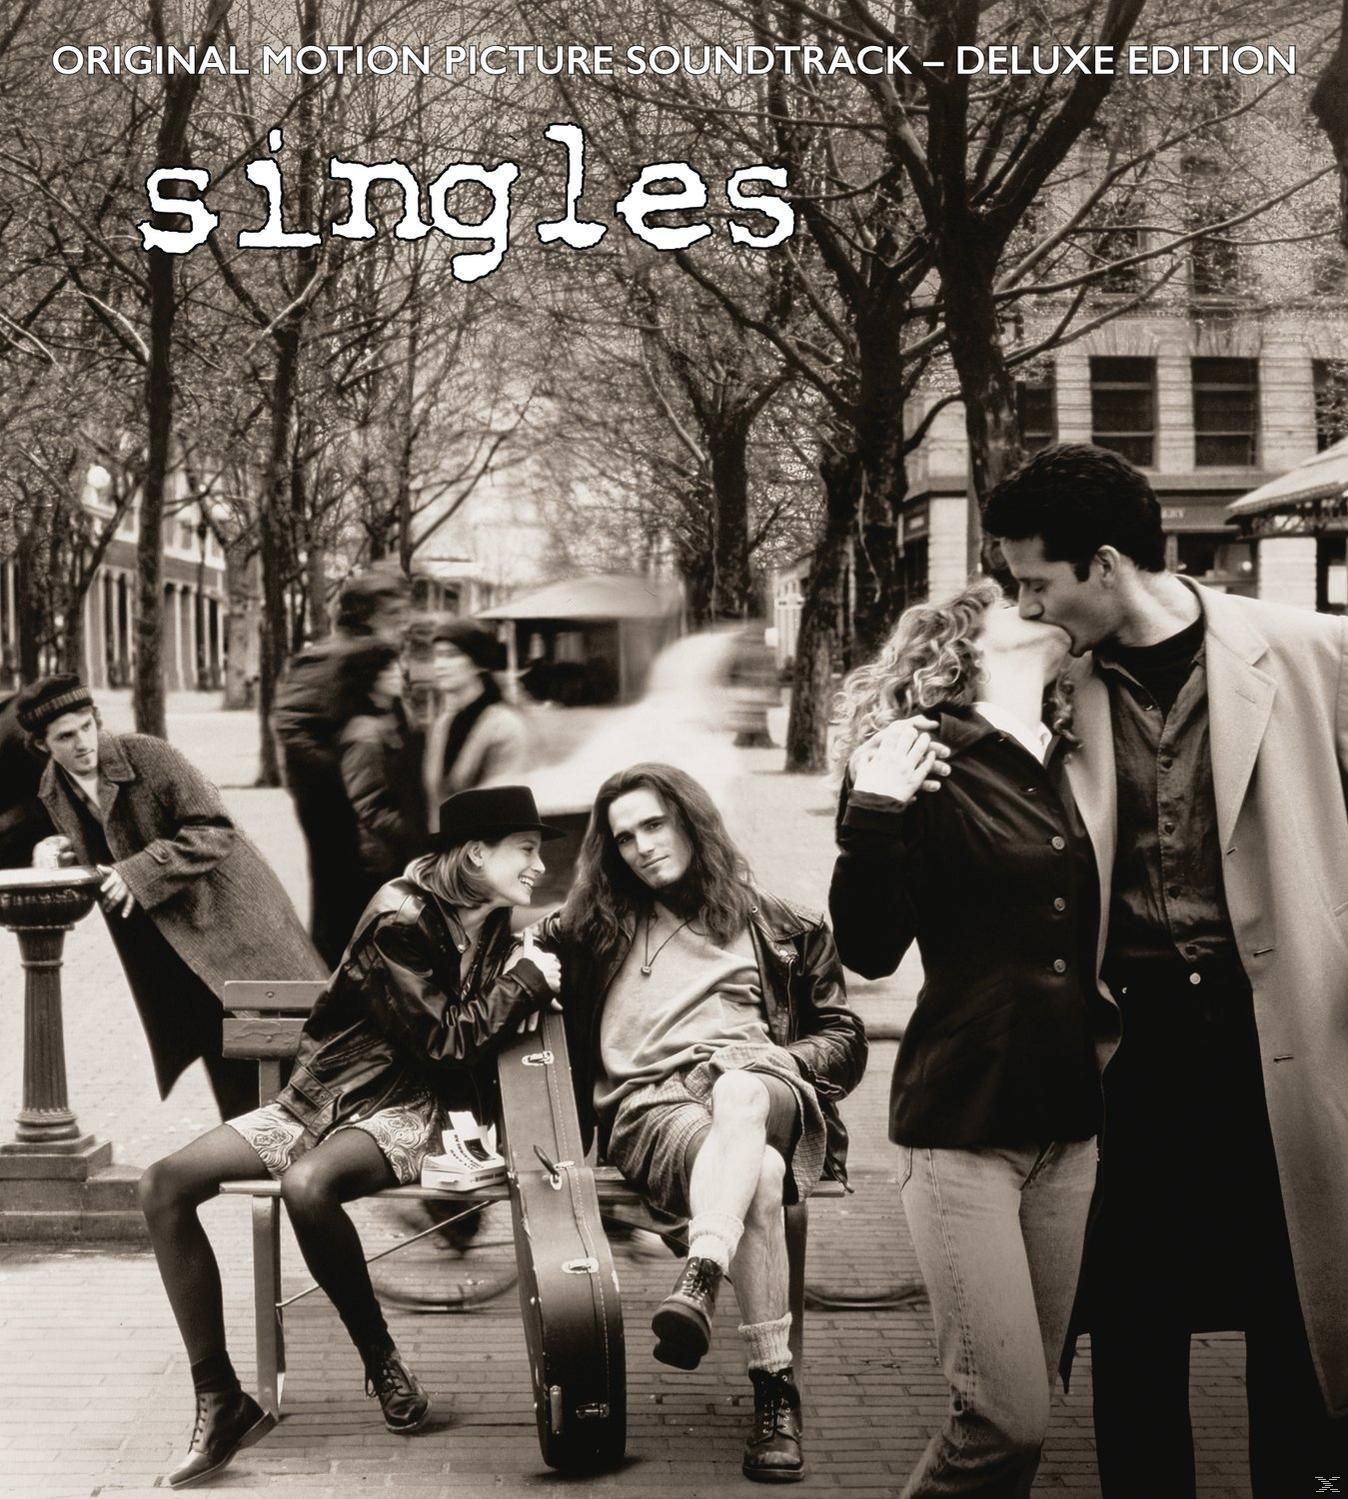 VARIOUS - Singles/OST - (CD) (Deluxe Edition)